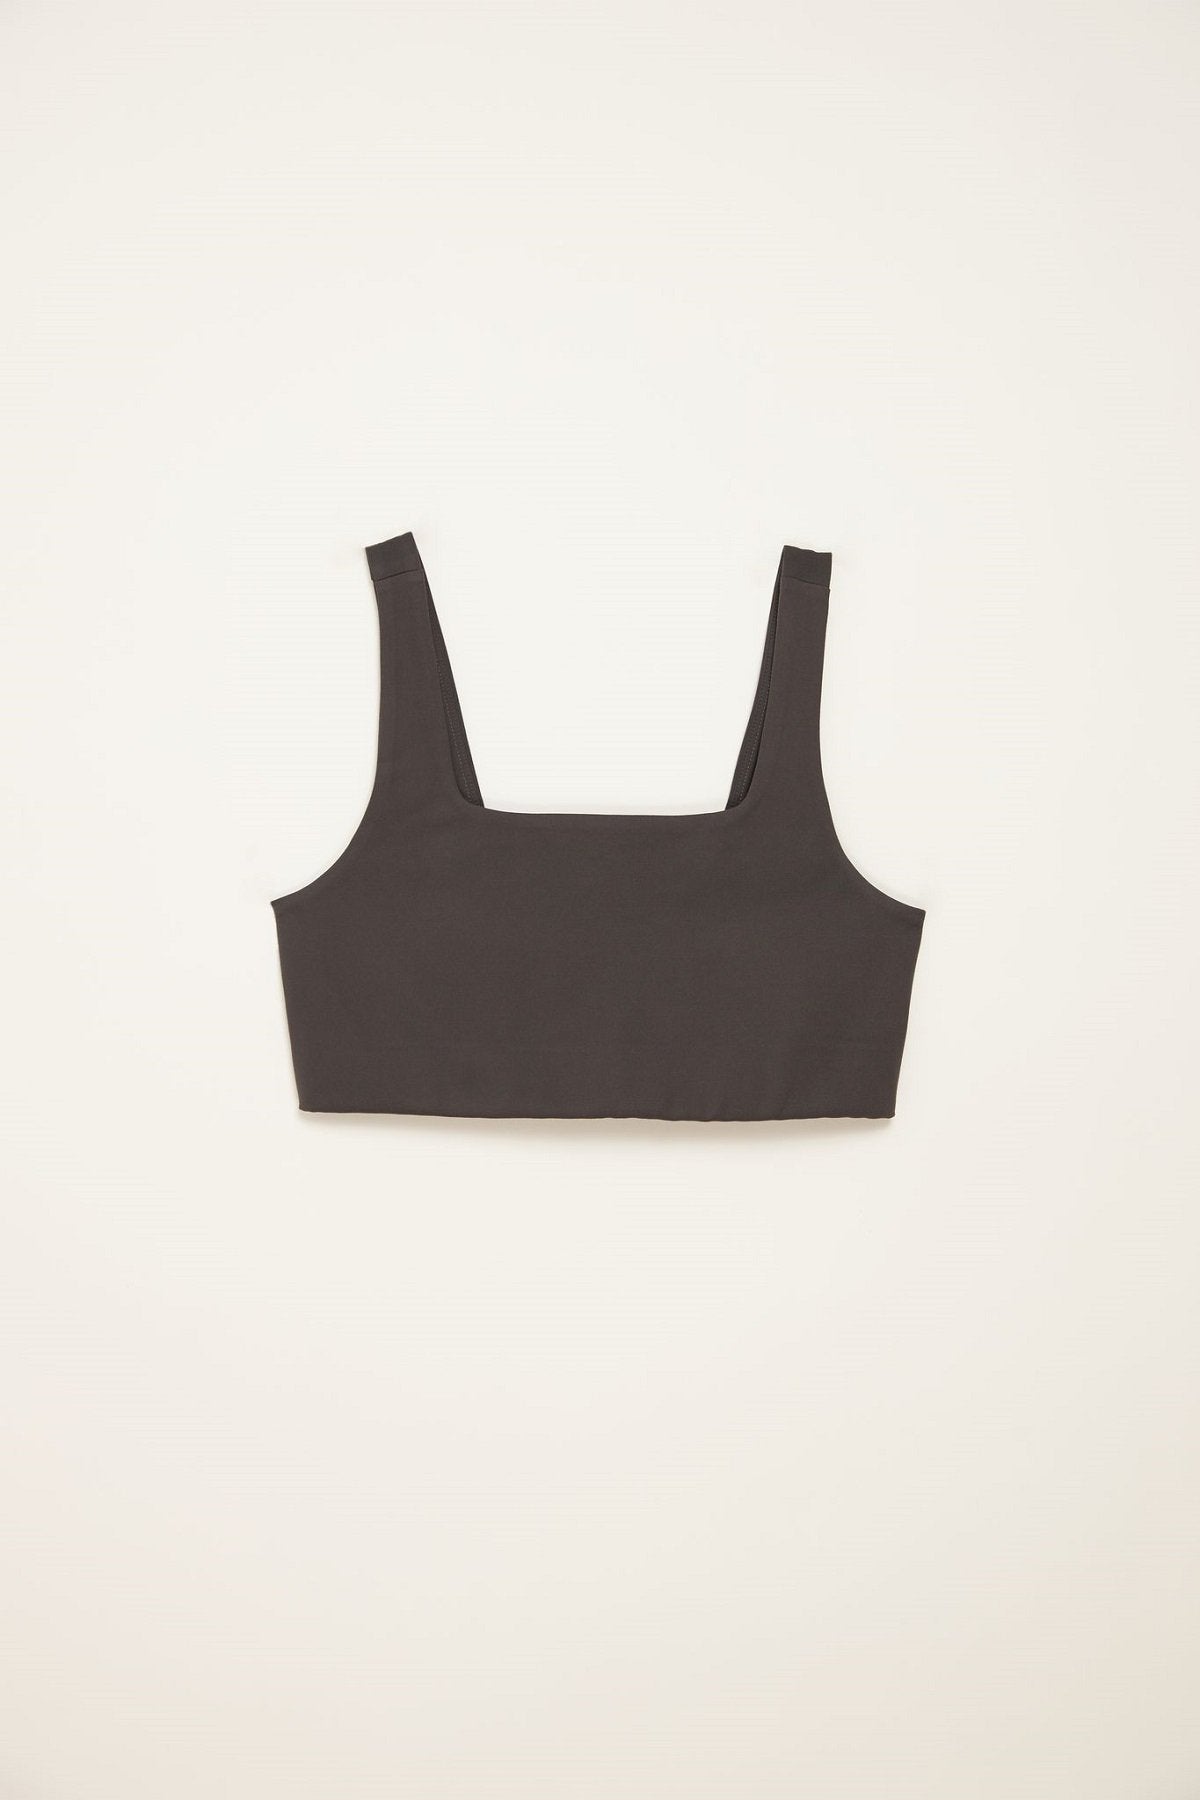 Girlfriend Collective W's Tommy Bra Square Neck - Made from Recycled Plastic Bottles Moon XS Underwear